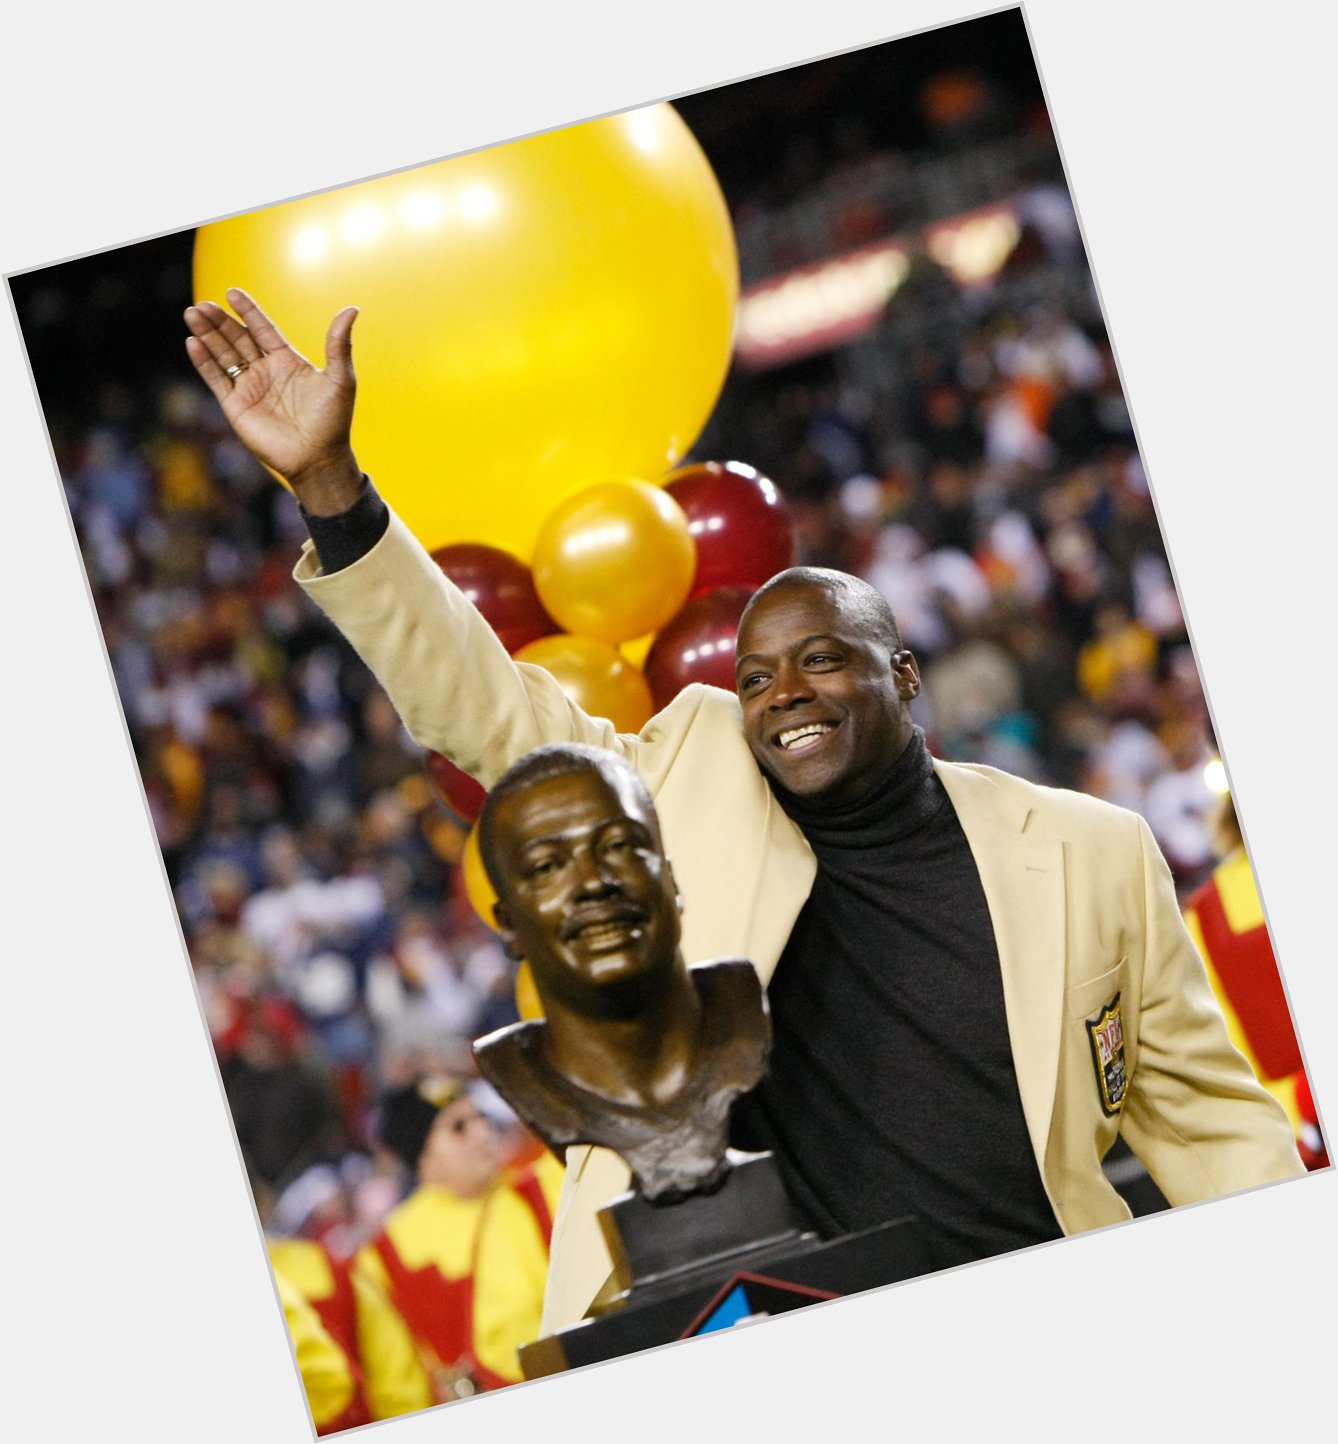 REmessage to wish Legend Darrell Green a happy 57th birthday today!!! 